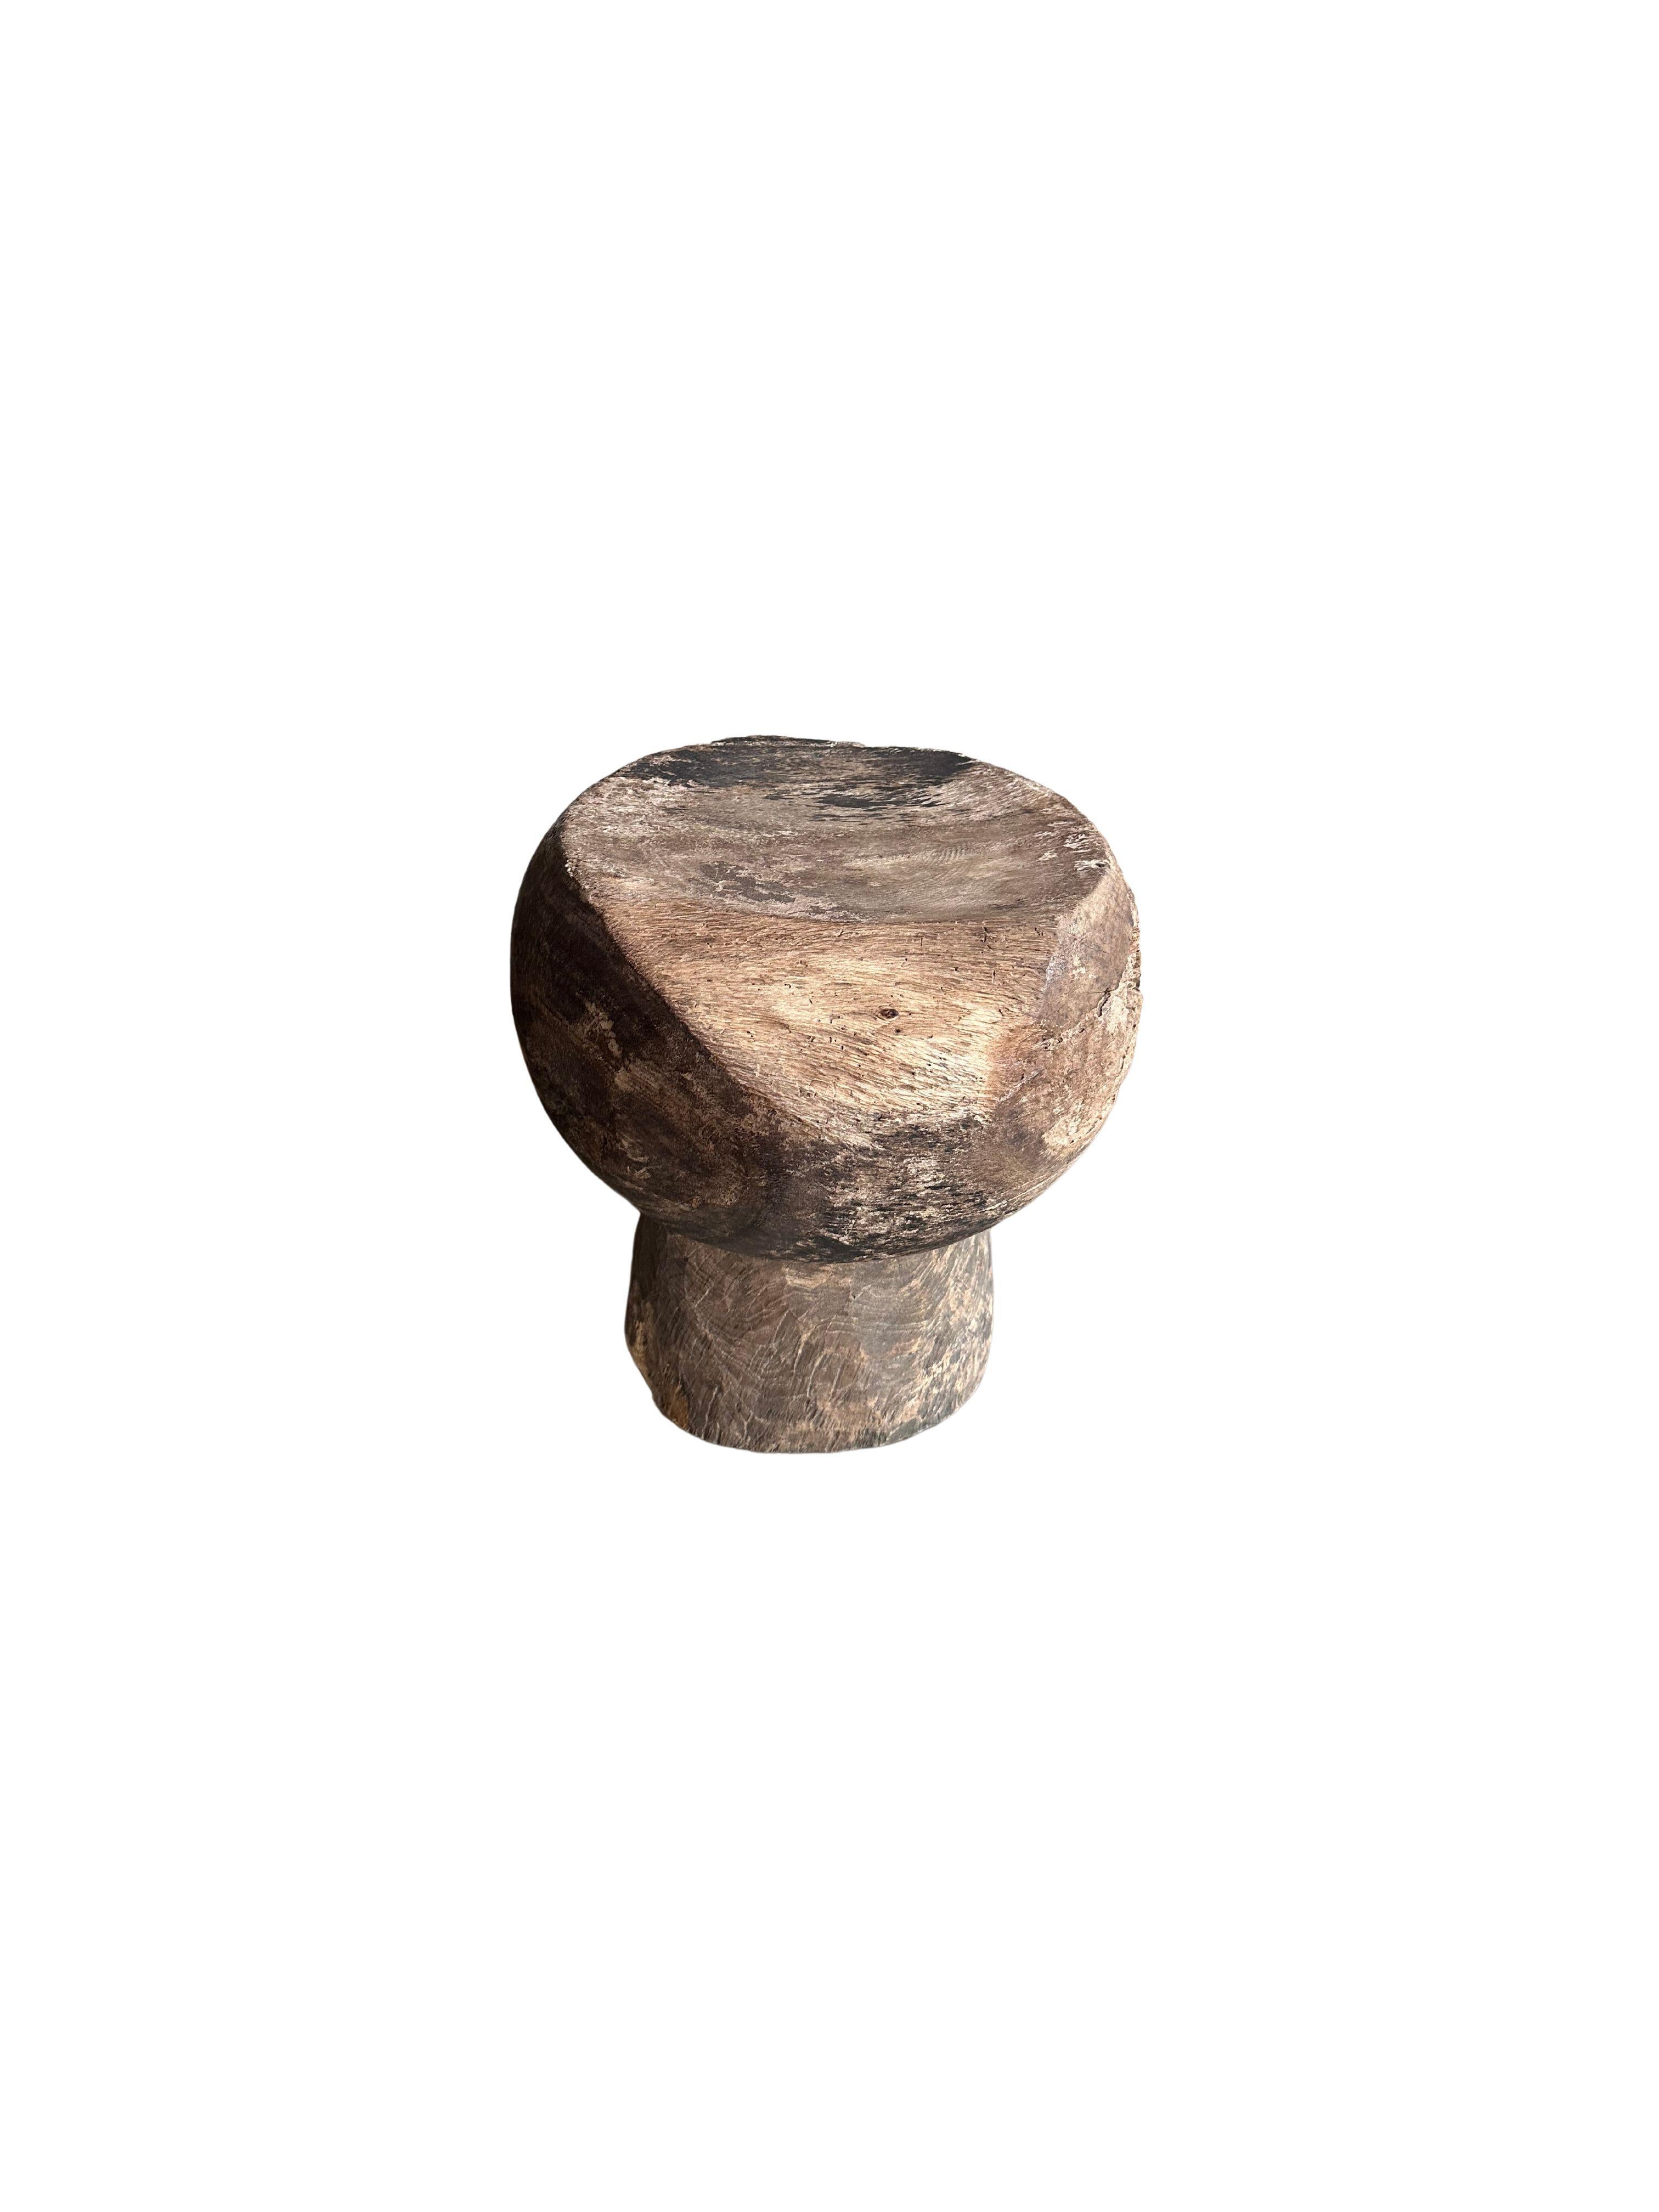 A wonderful Javanese Suar wood stool featuring an array of wood textures and shades. The subtly curved seat adds to its charm. This item features an age related patina that has developed on the wood. A sculptural object perfect to bring warmth to